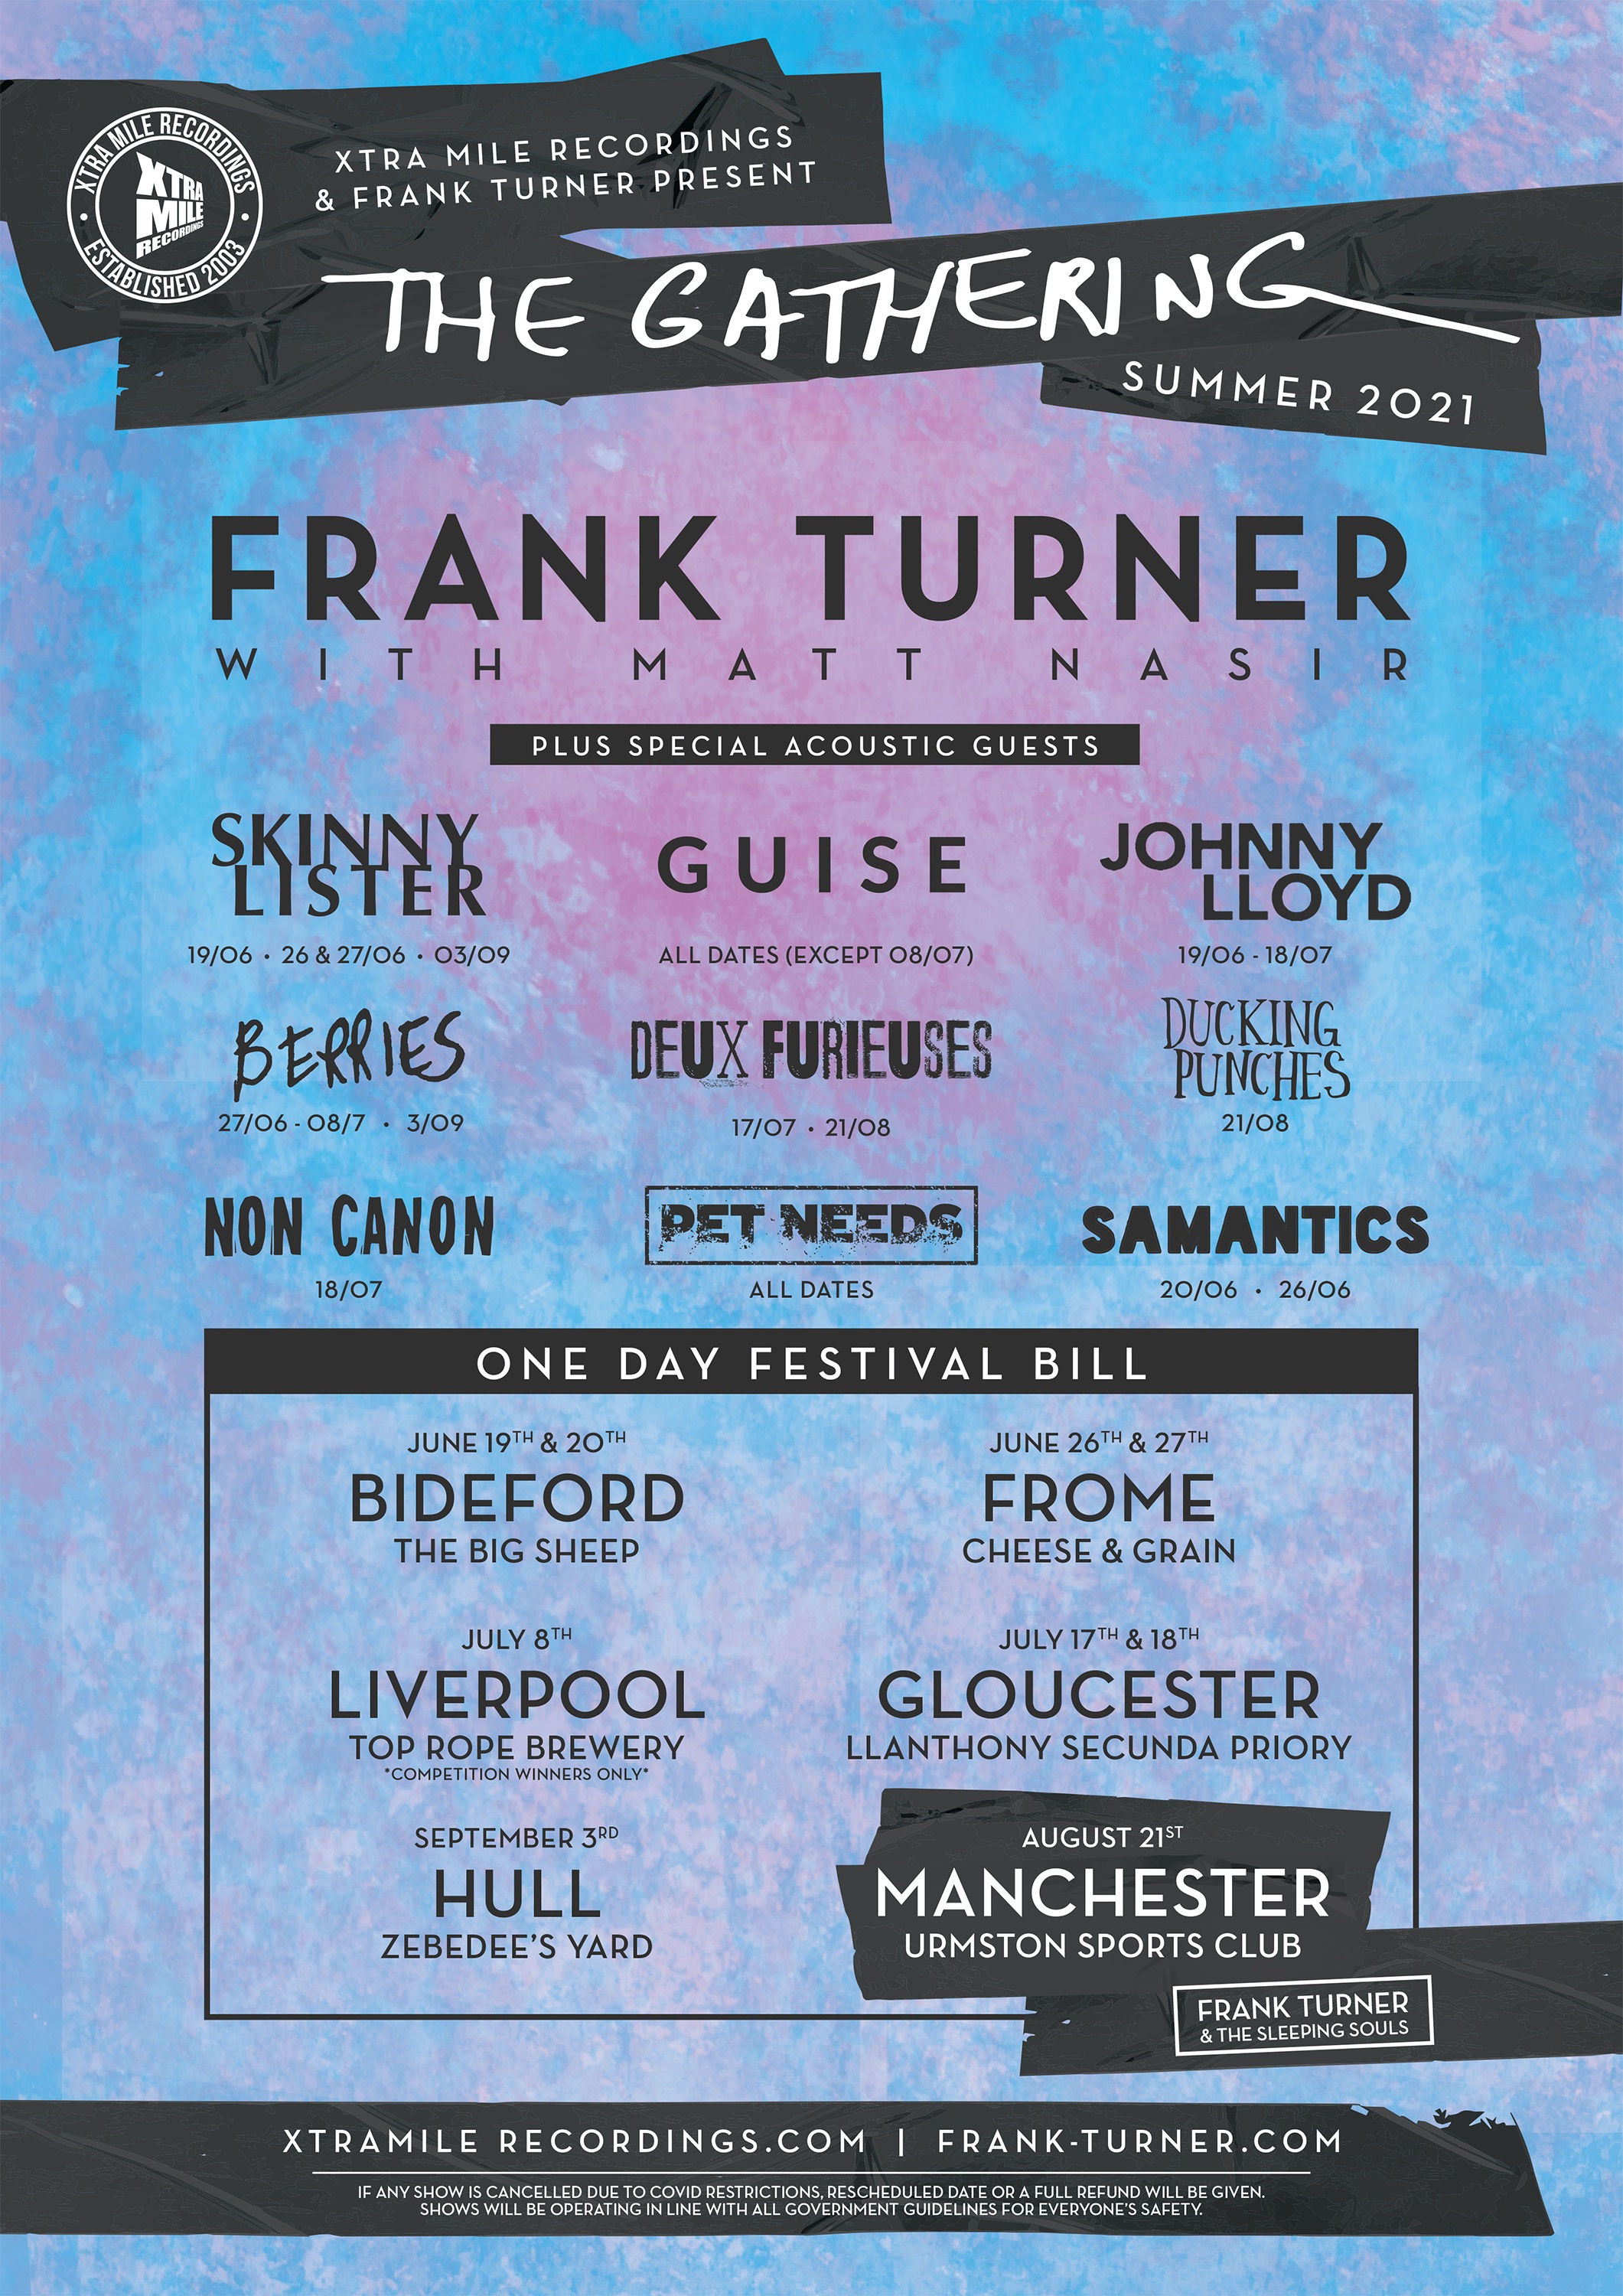 Frank Turner The Gathering shows